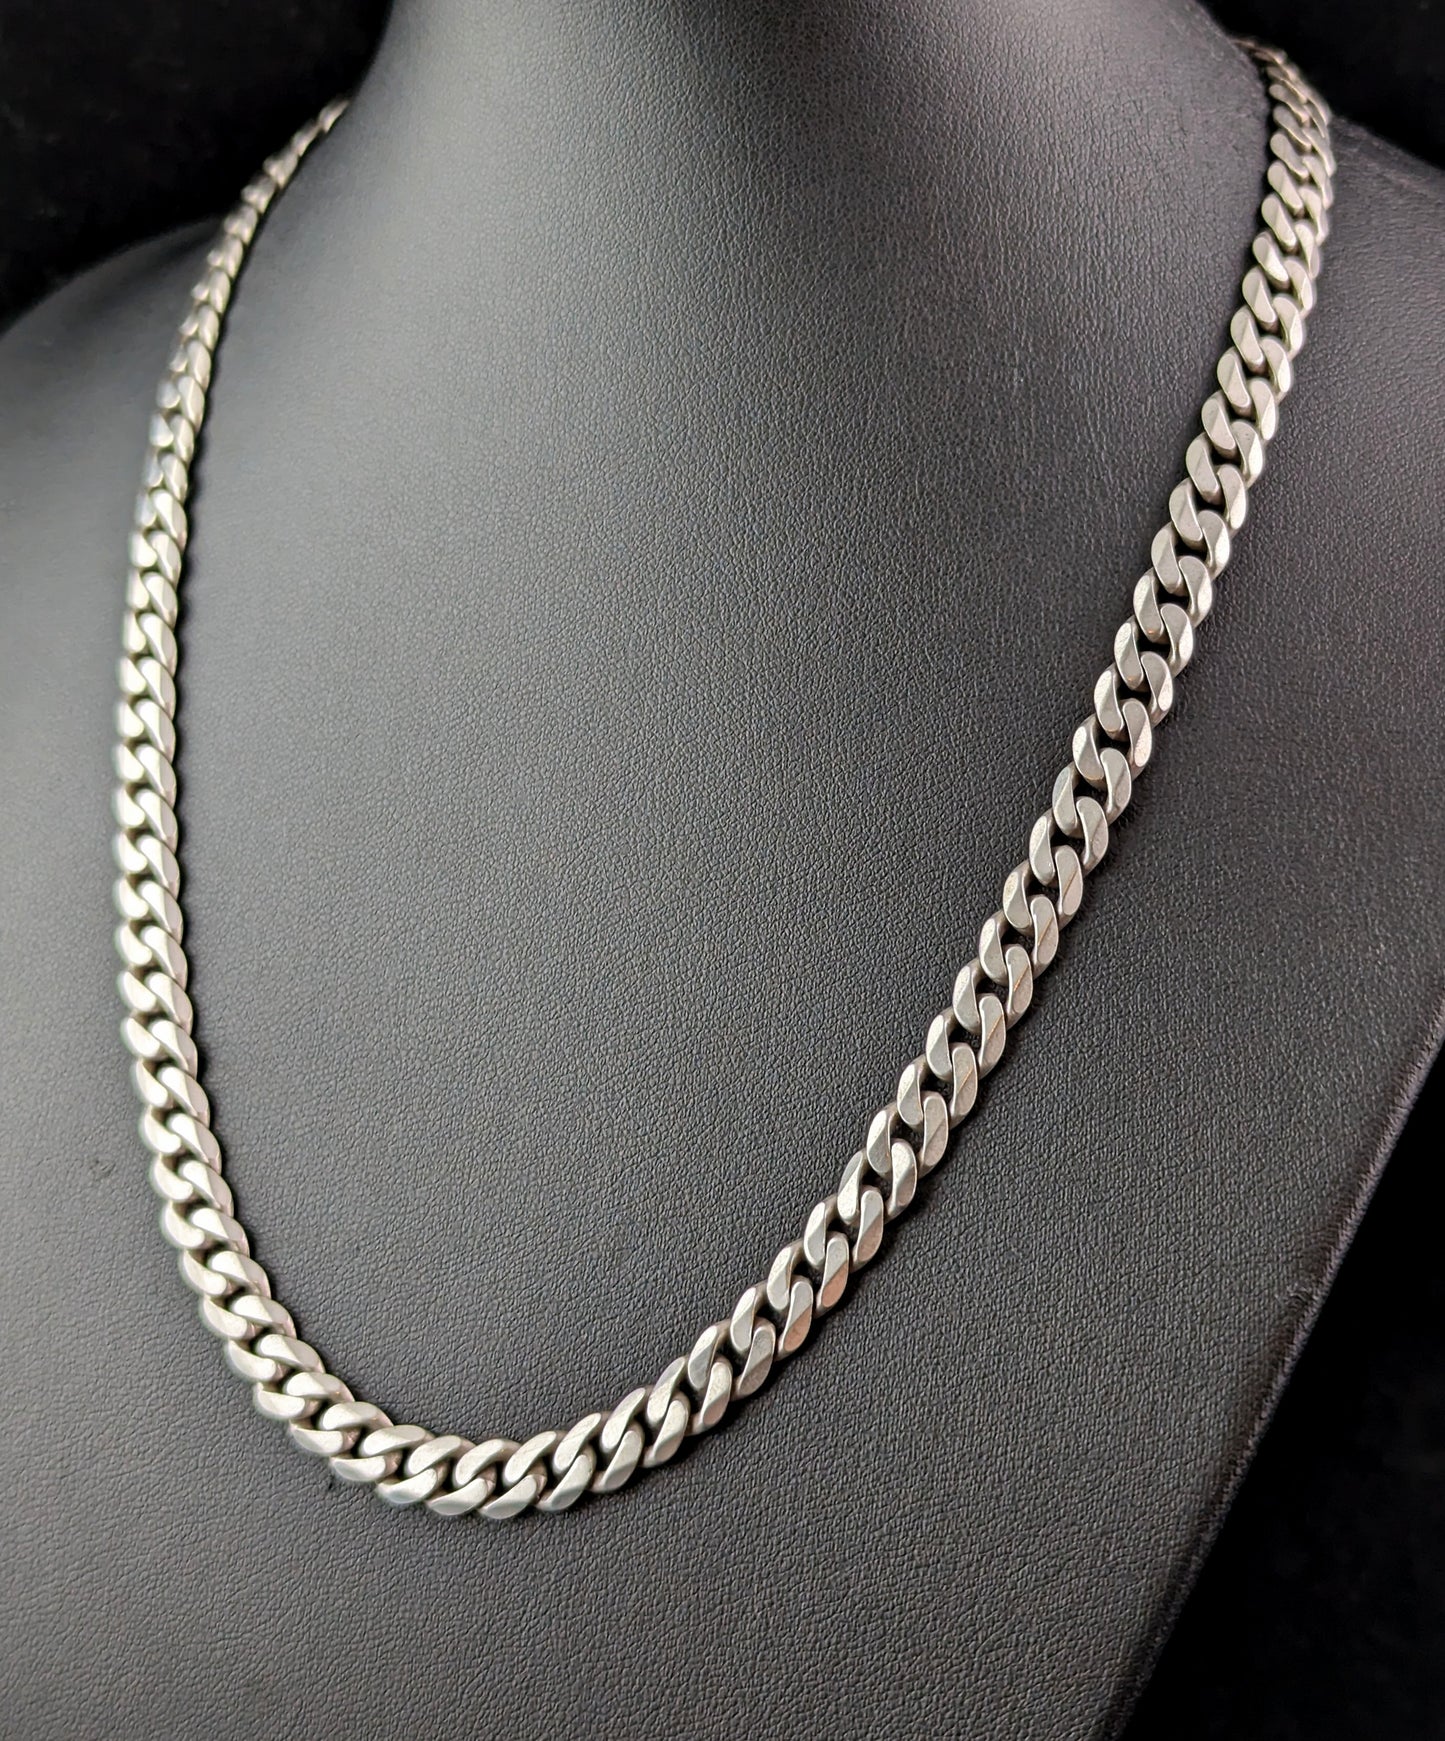 Vintage sterling silver flat curb link chain necklace